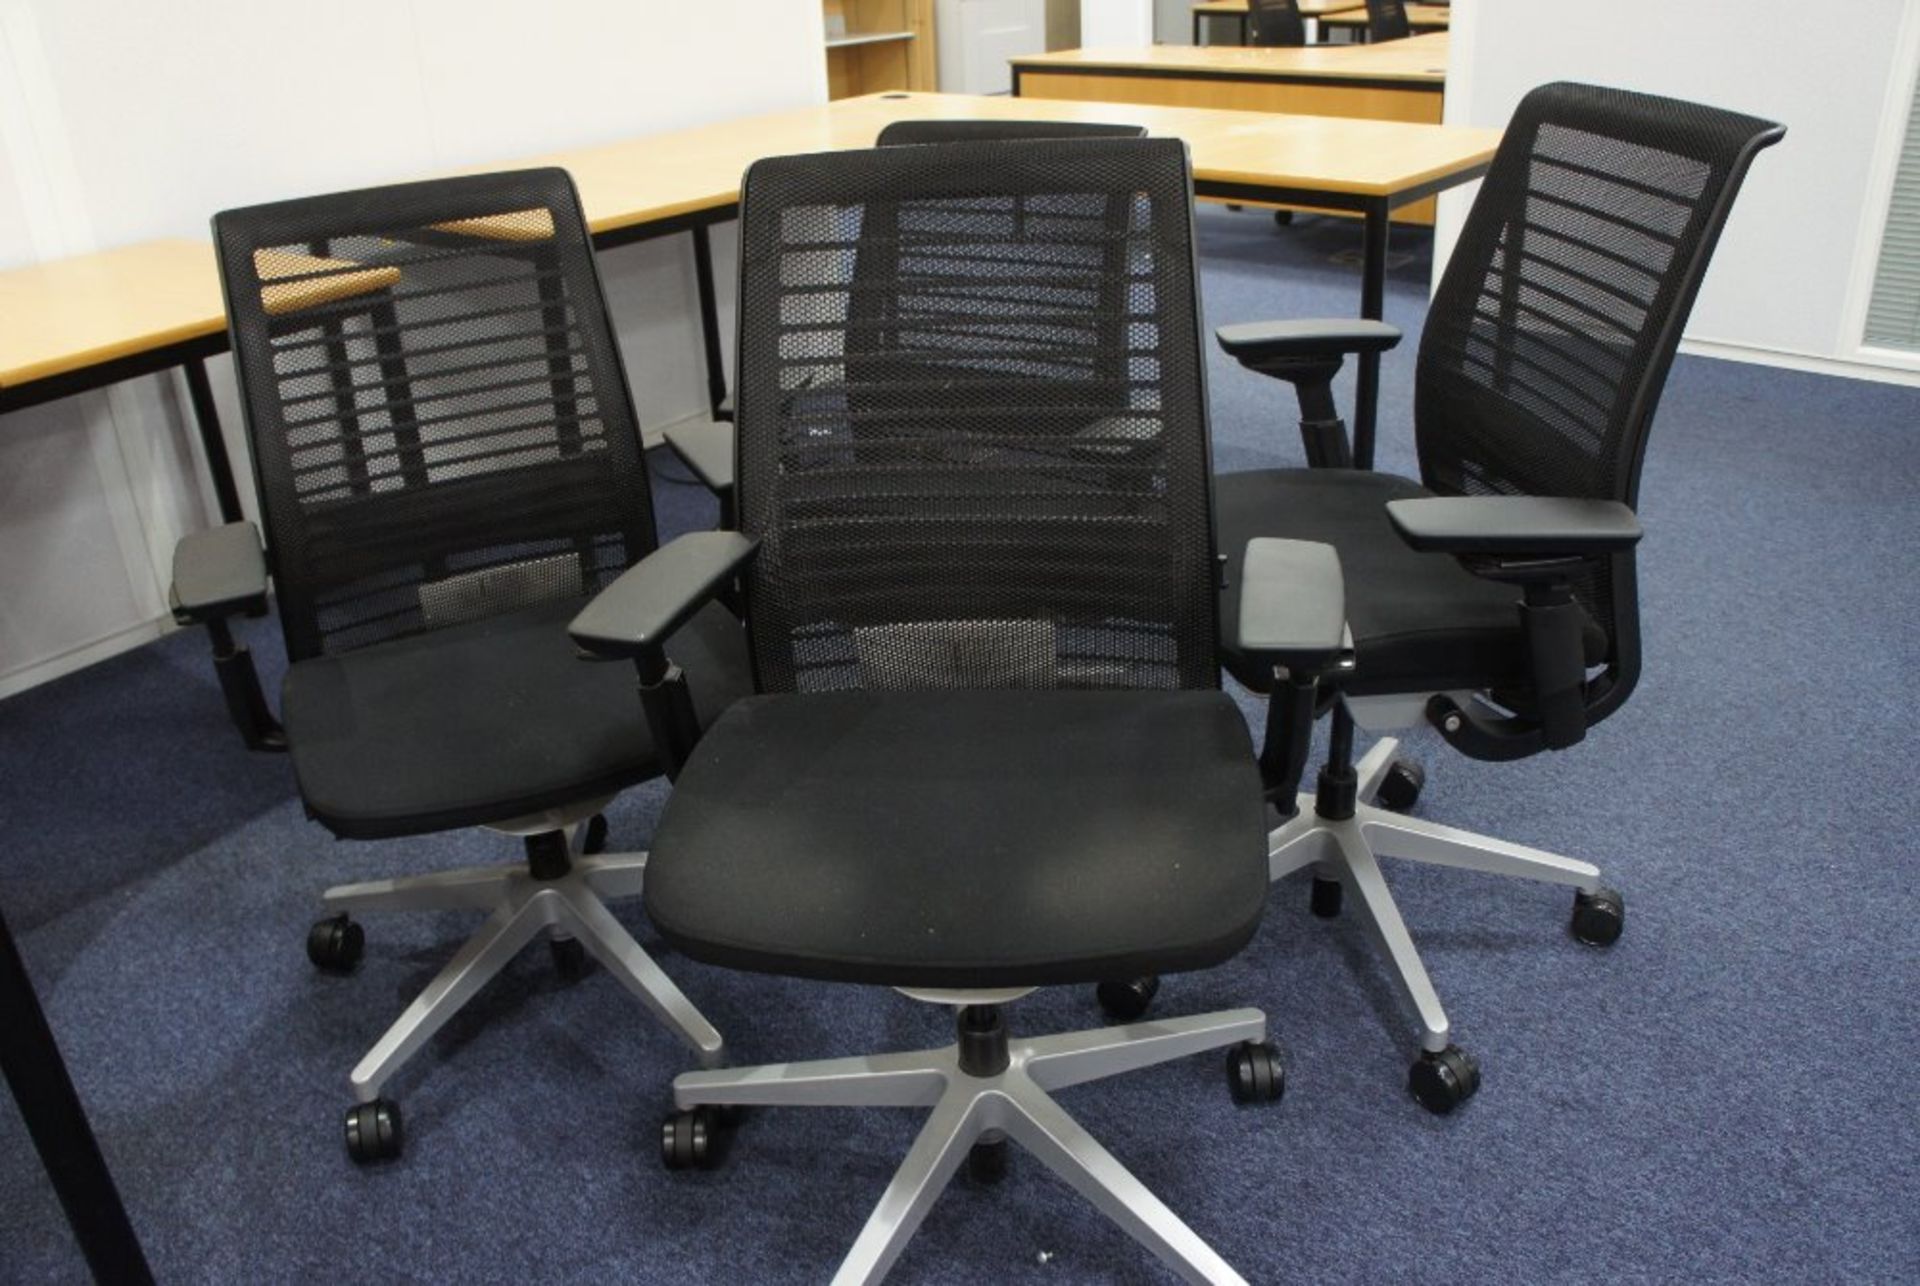 4 x Steelcase 67012 Strasbourg gas lift office chairs